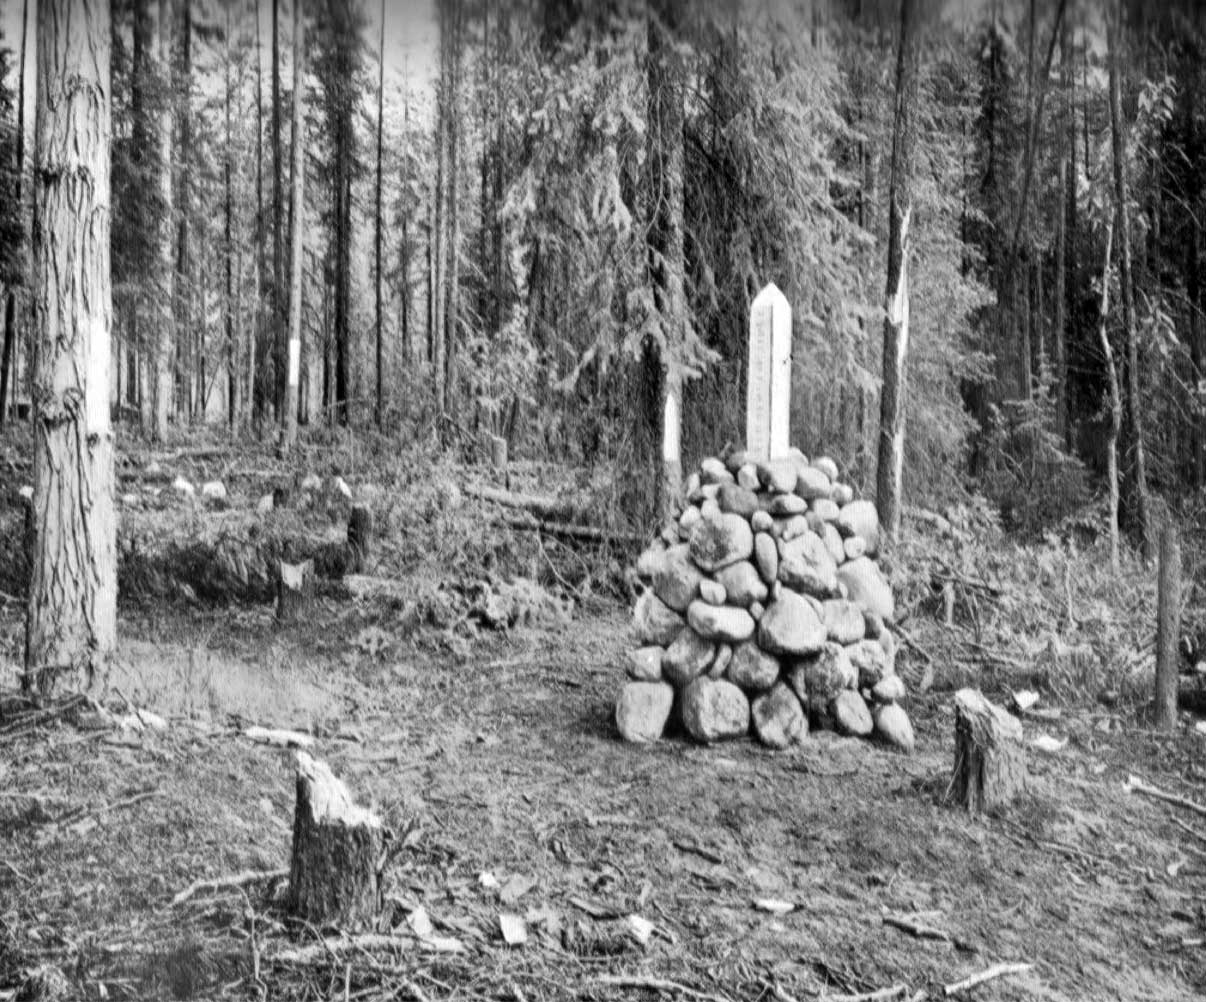 Monument placed at summit of Yellowhead Pass.
Photo: A. 0. Wheeler, 1911